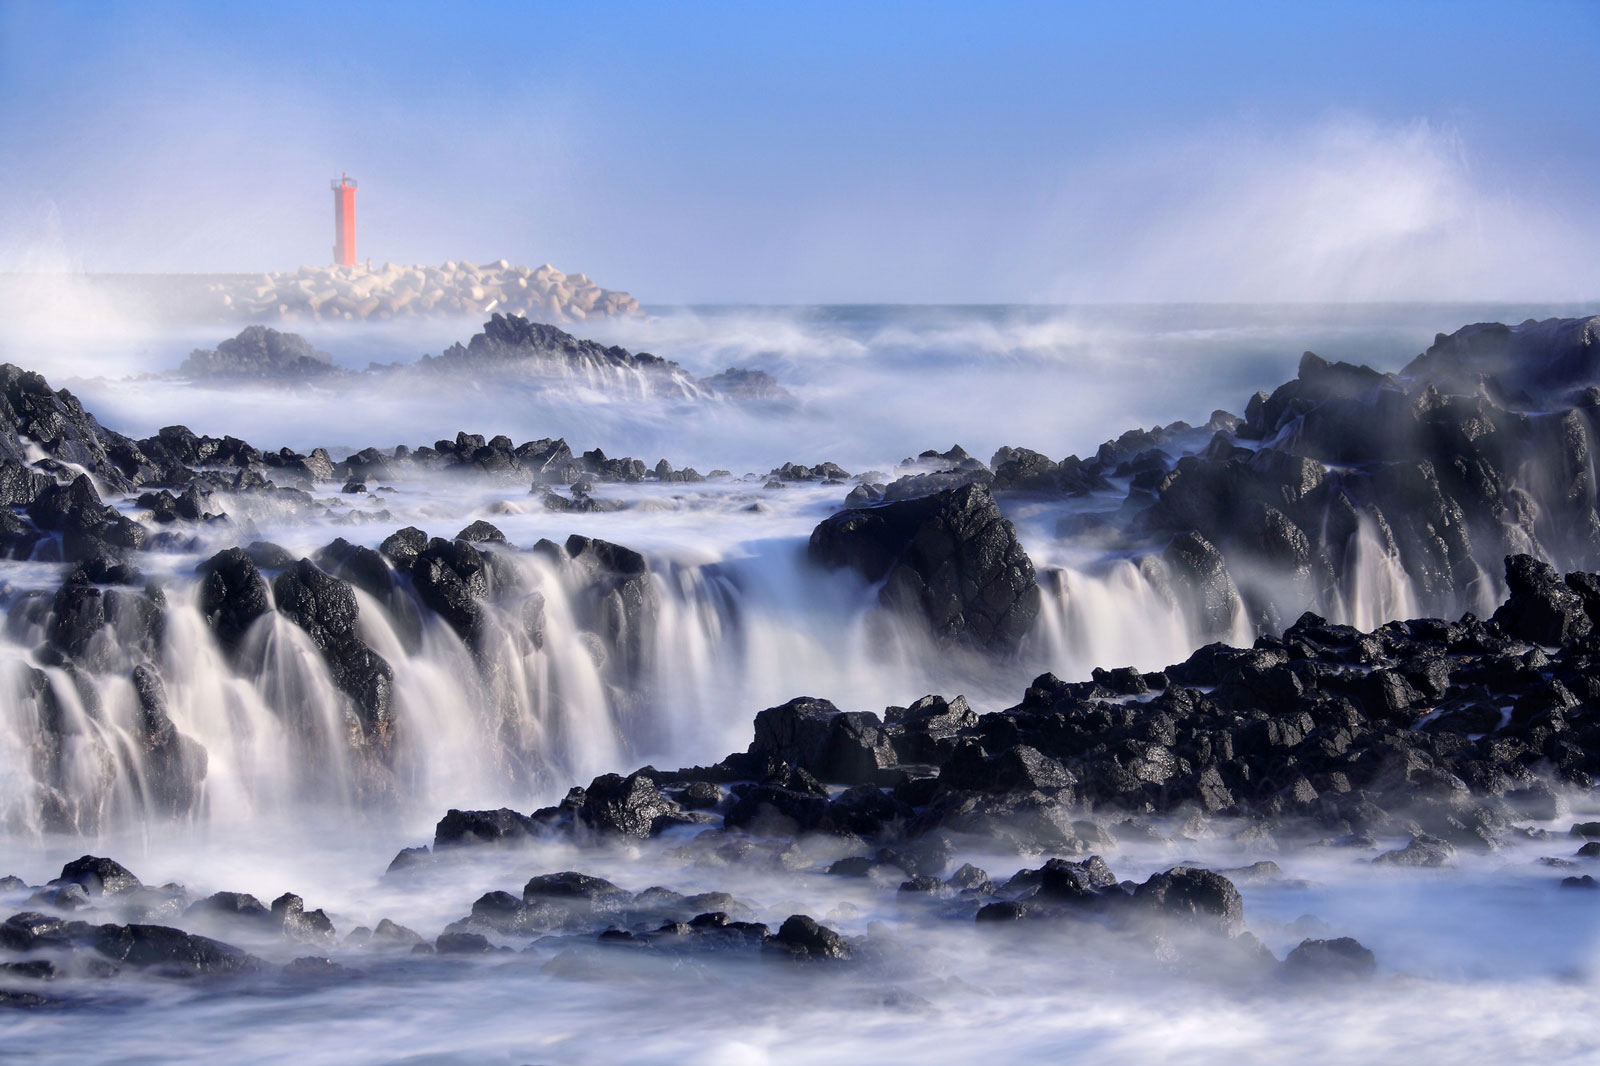 Title: Advancing waves | Photographer: Hyun-jin, Bae | ND400 filter, f/9, 2 sec, ISO100